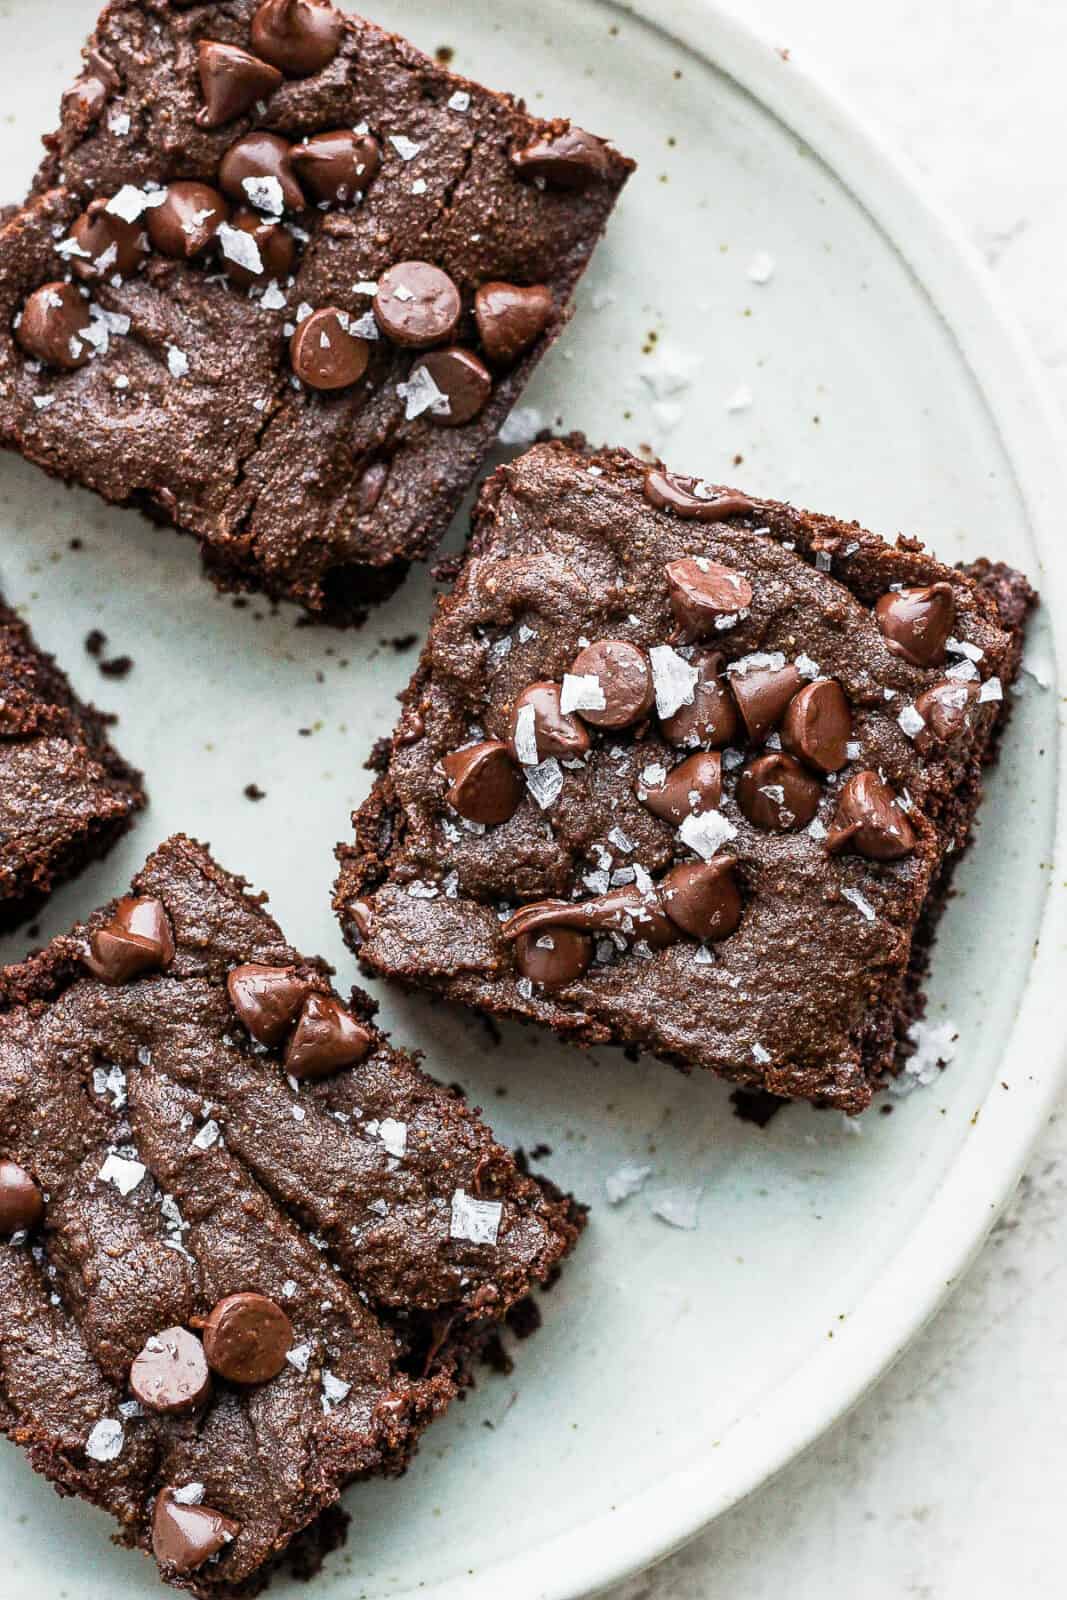 Three almond flour brownies on a plate.